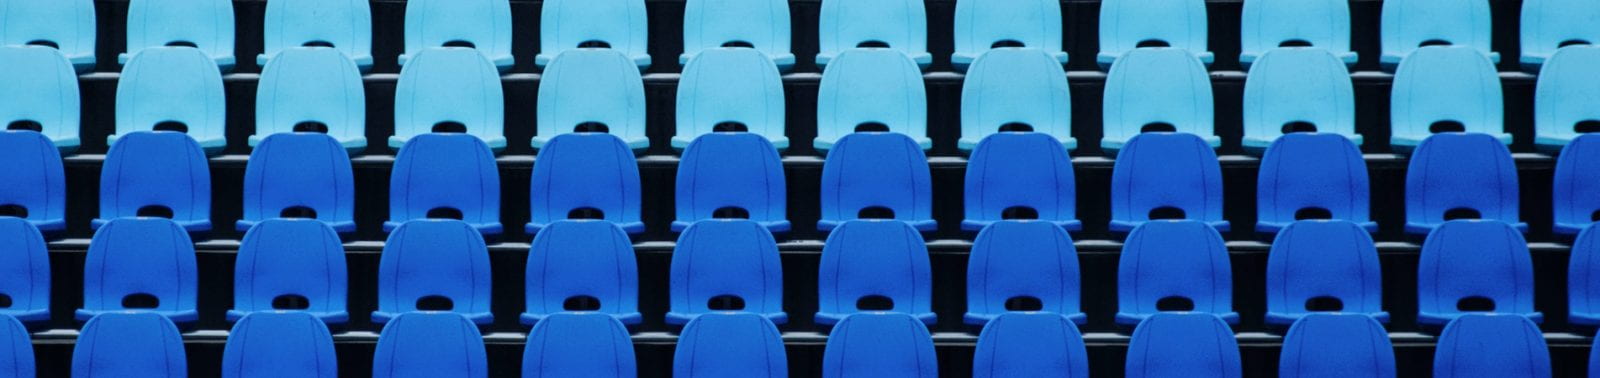 blue chairs in an auditorium